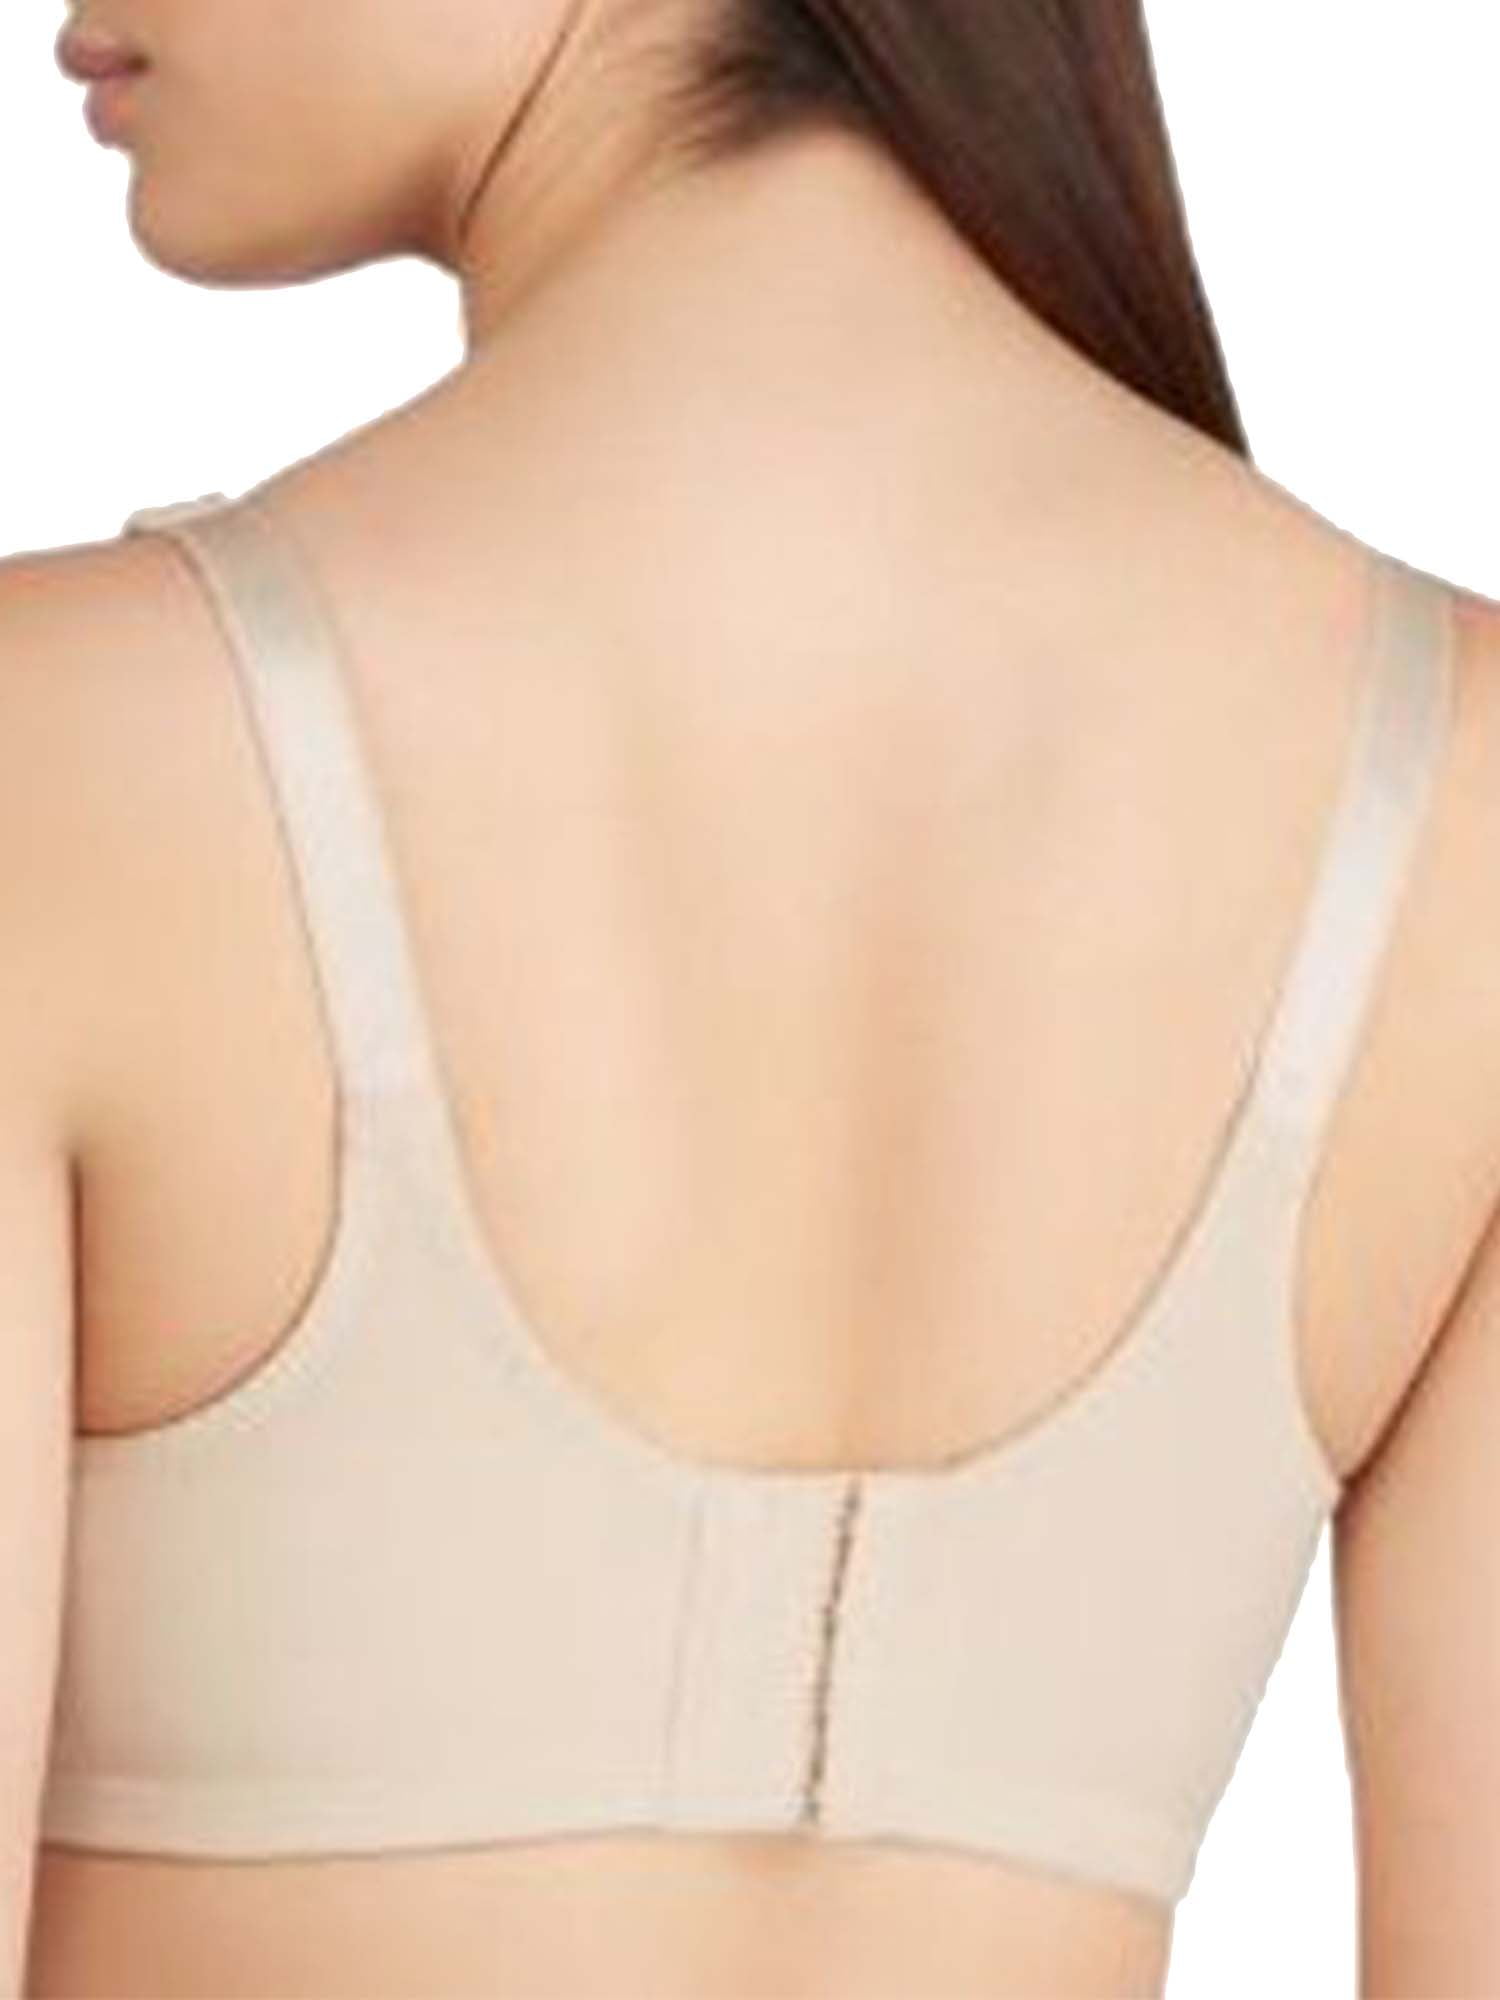 Bali® Double Support Comfort-U Back Full-Figure Bra 3036 Limited Edition  reduction in price 